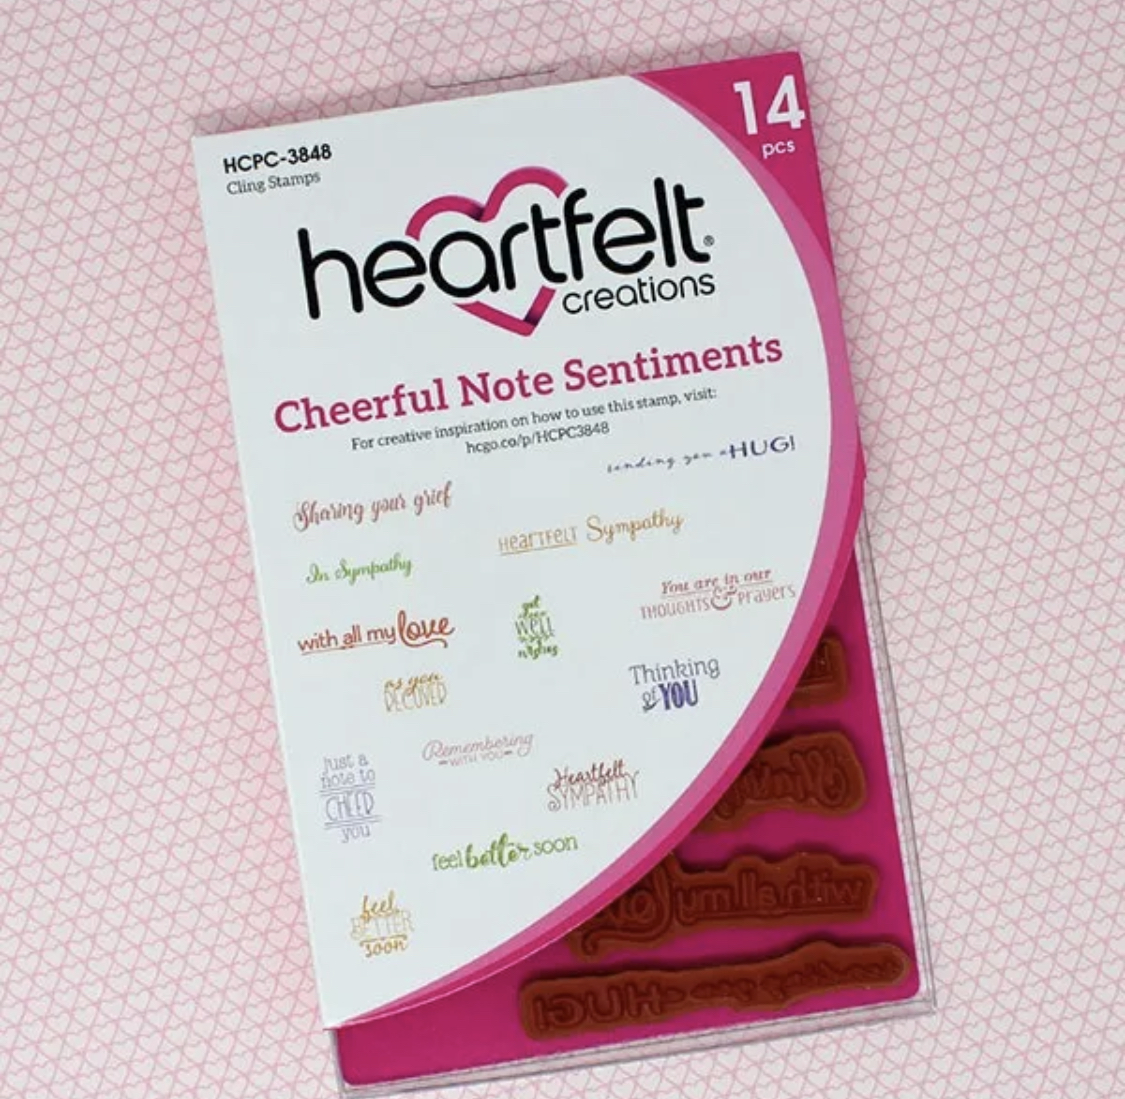 Heartfelt Creations Cheerful Note Sentiments Cling Stamp Set